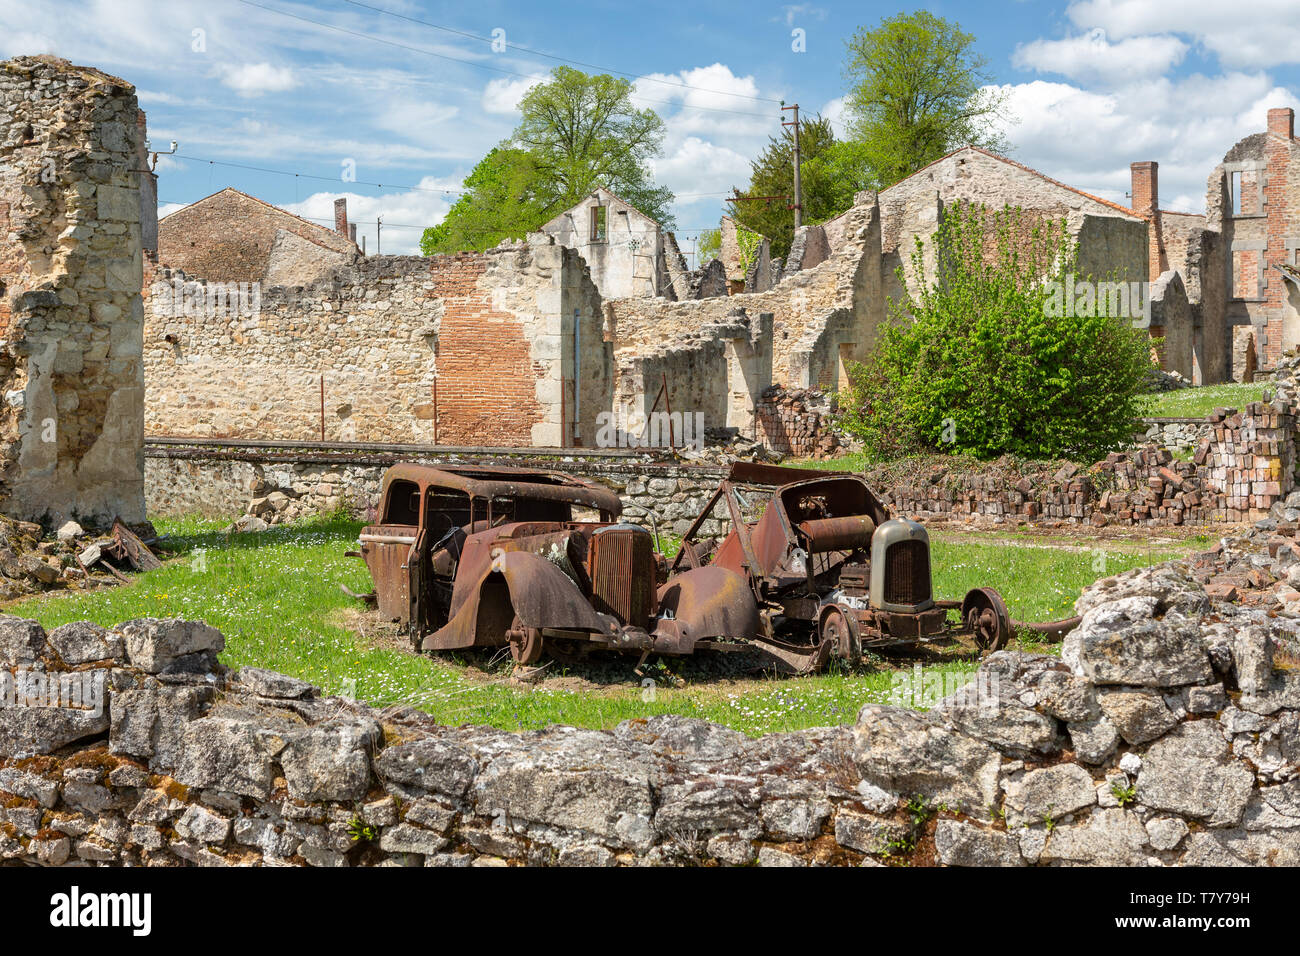 Oradour-sur-Glane, France - April 29, 2019: Old car wrecks in the ruins of the village after the massacre by the german nazi's in 1944 that destroyed  Stock Photo